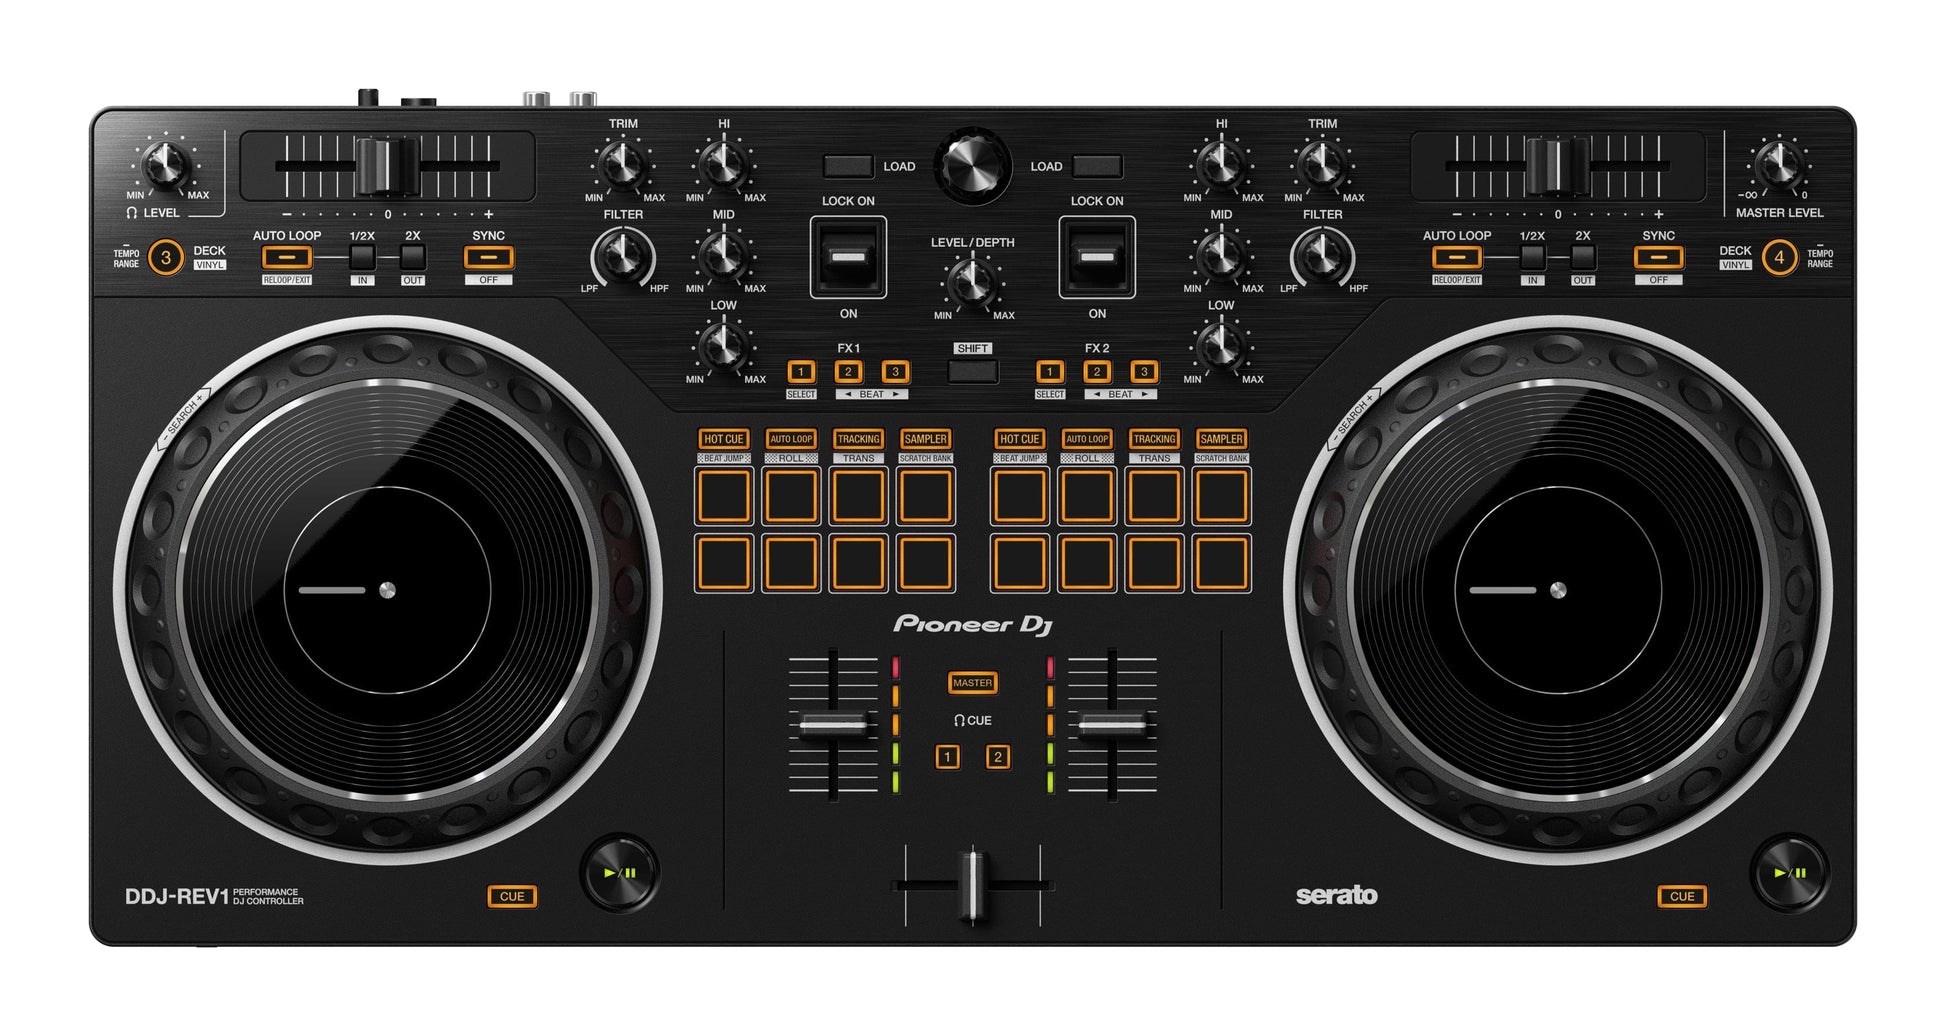 Getting Started With The Pioneer DJ DDJ-FLX4 - Setup Tutorial